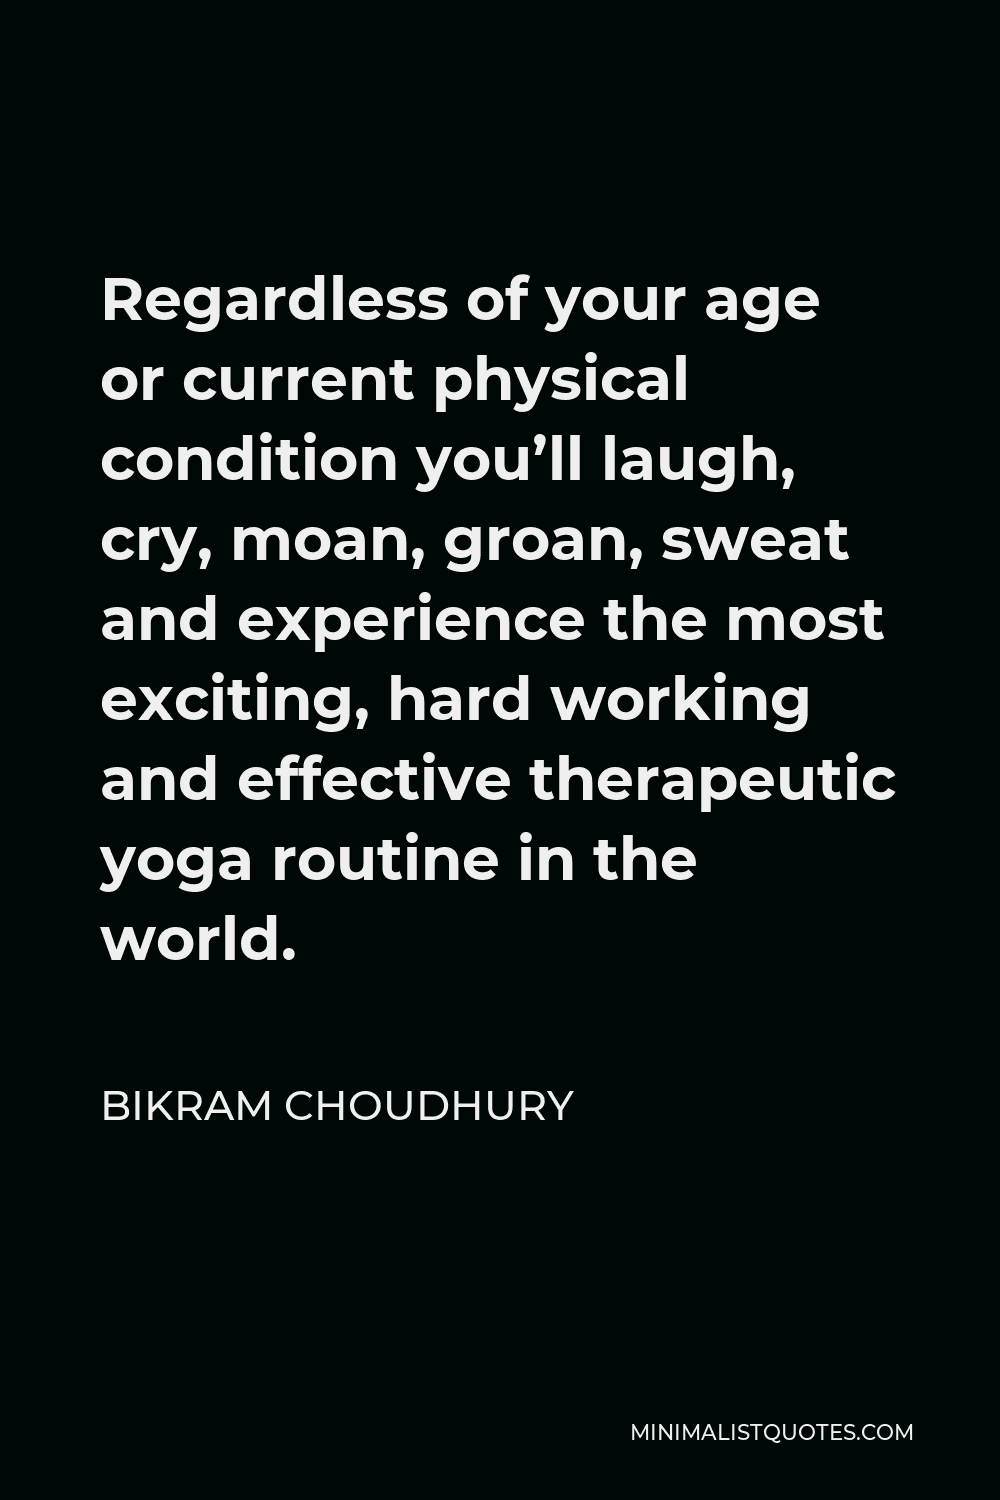 Bikram Choudhury Quote - Regardless of your age or current physical condition you’ll laugh, cry, moan, groan, sweat and experience the most exciting, hard working and effective therapeutic yoga routine in the world.